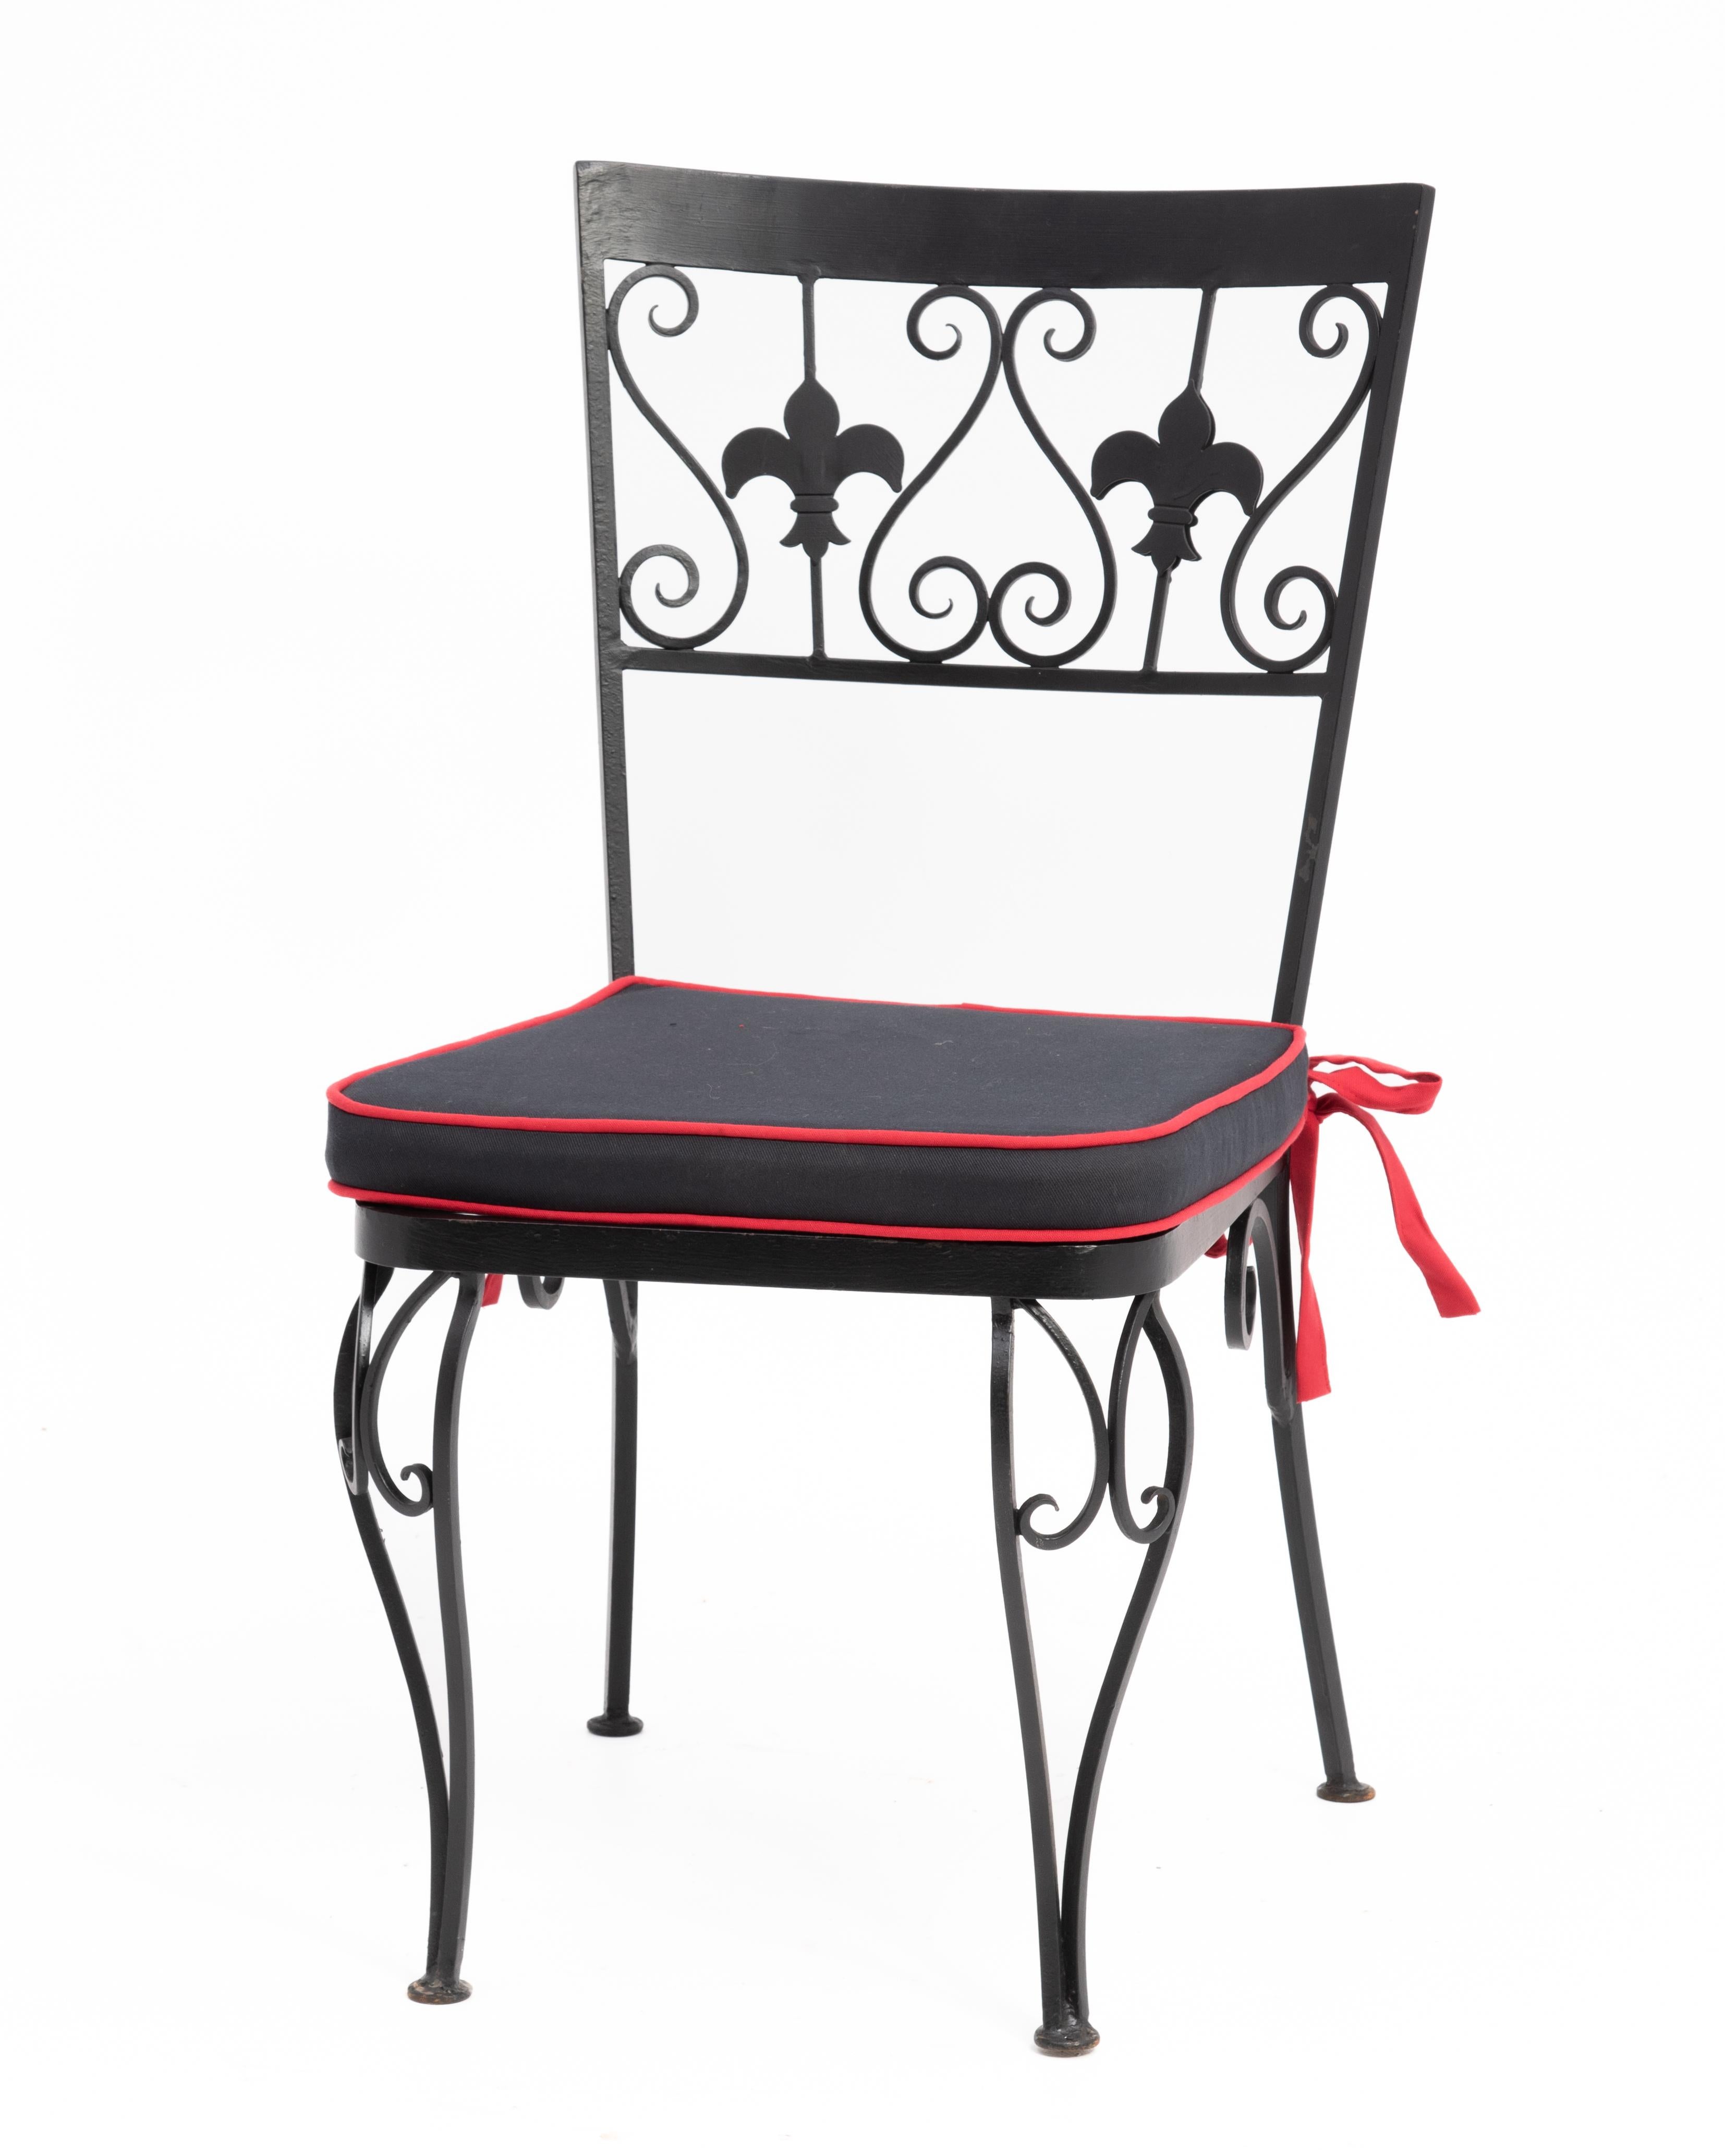 Hollywood Regency Wrought Iron Fleur-De-Lis Dining Chairs 1960s - a Set of 6 For Sale 3